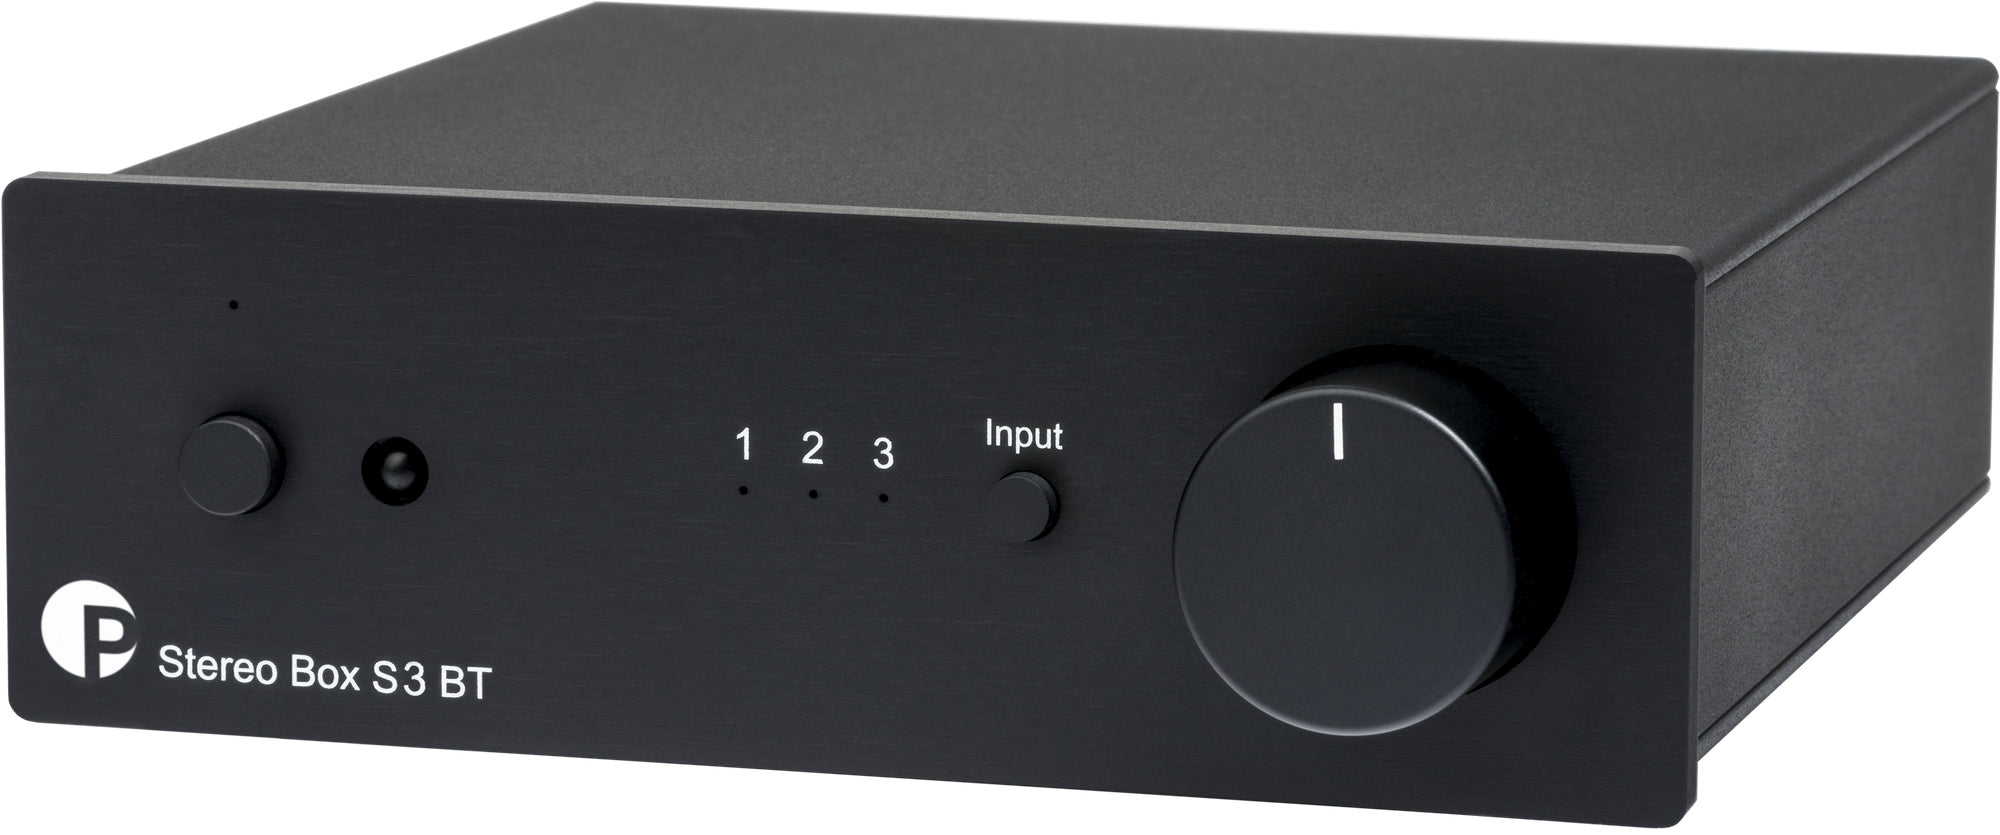 PRO-JECT STEREO BOX S3 BT INTEGRATED AMPLIFIER WITH BLUETOOTH